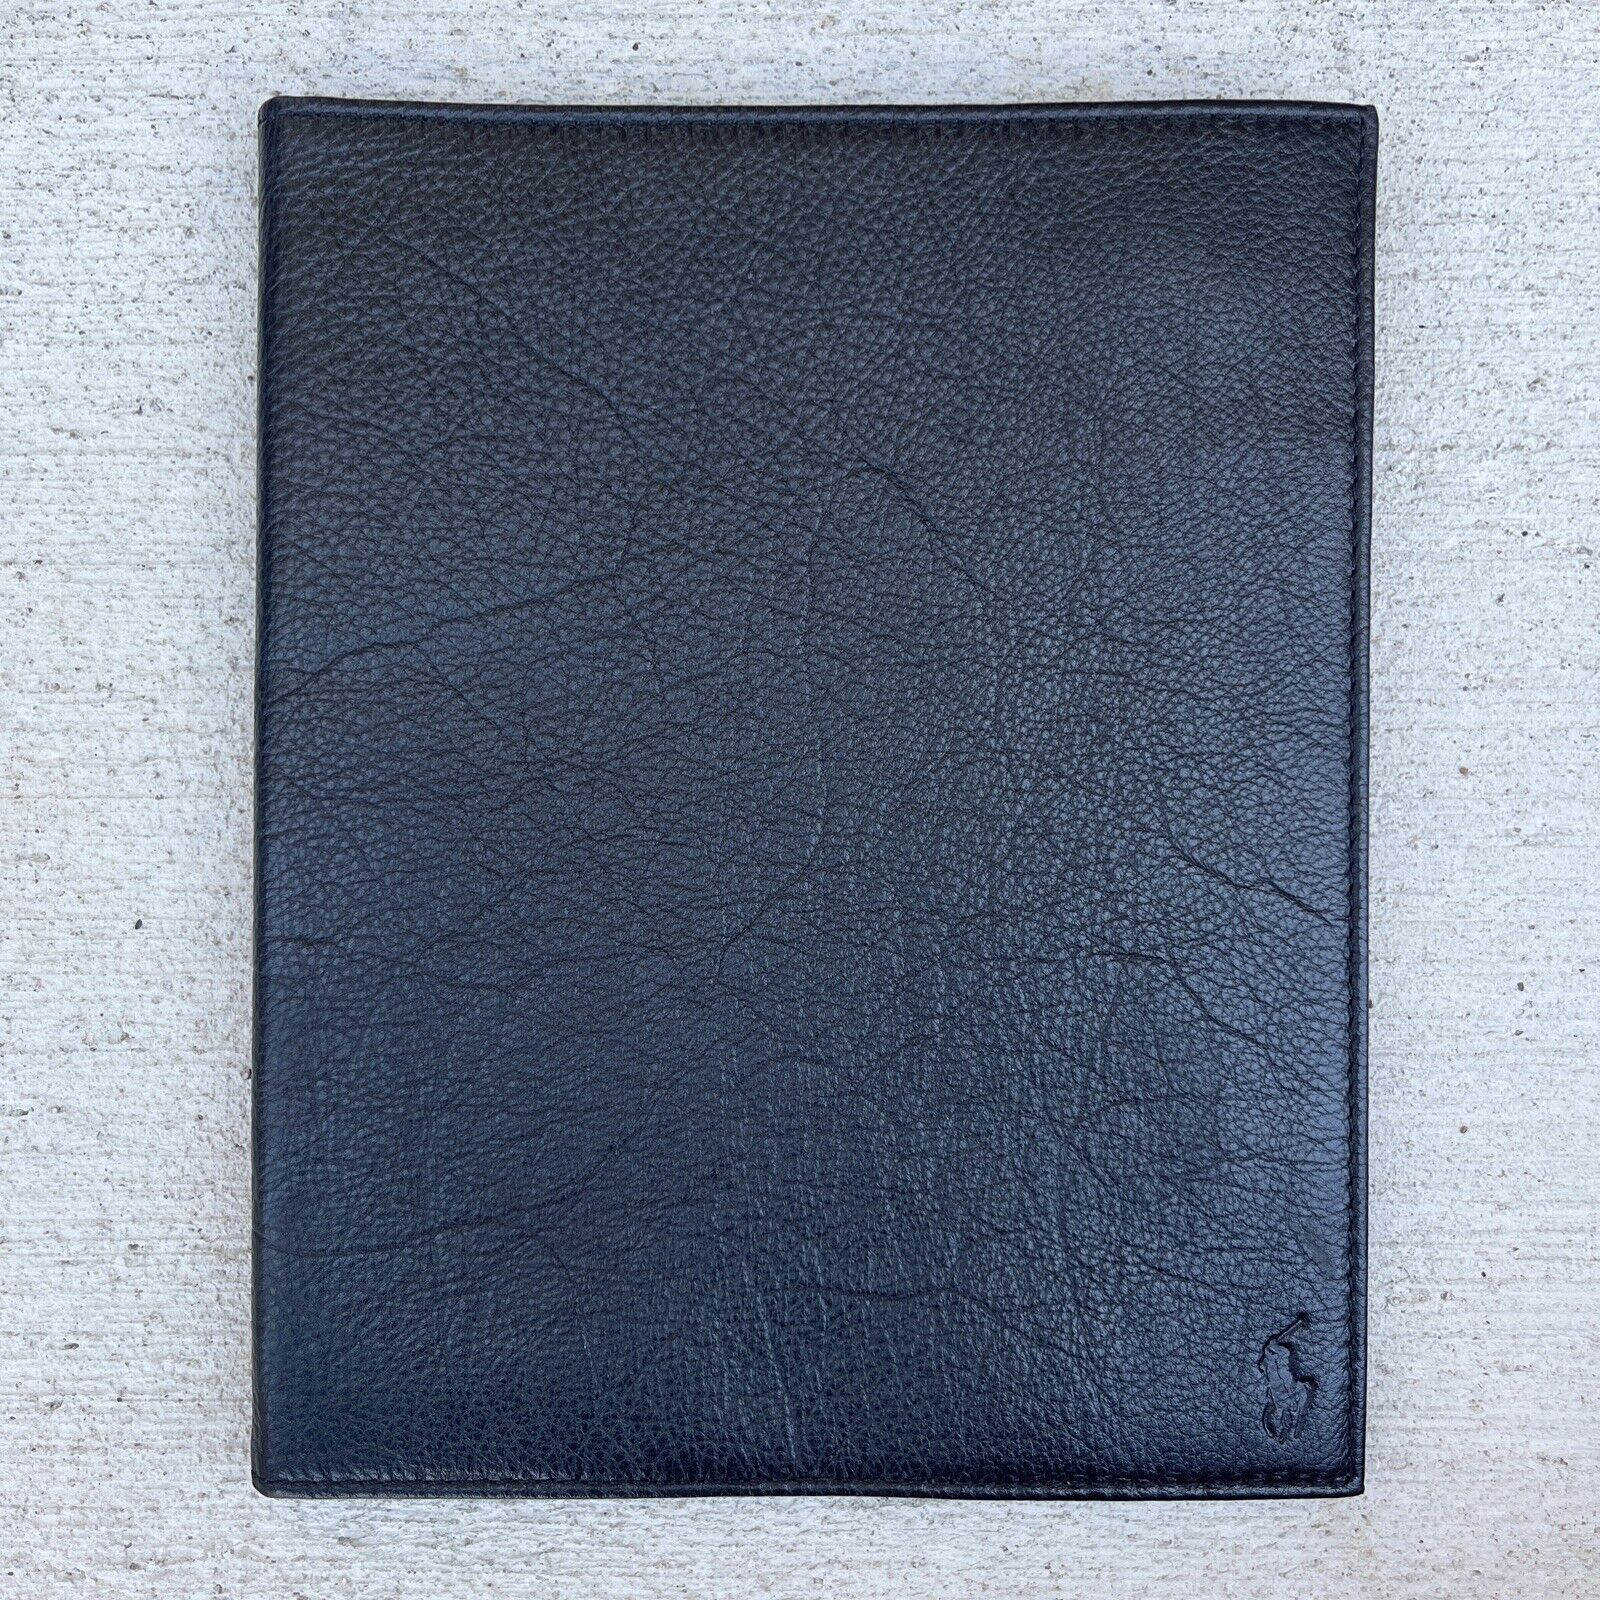 Polo Ralph Lauren Leather Tablet Case Black $145 (SHIPS NEXT DAY)